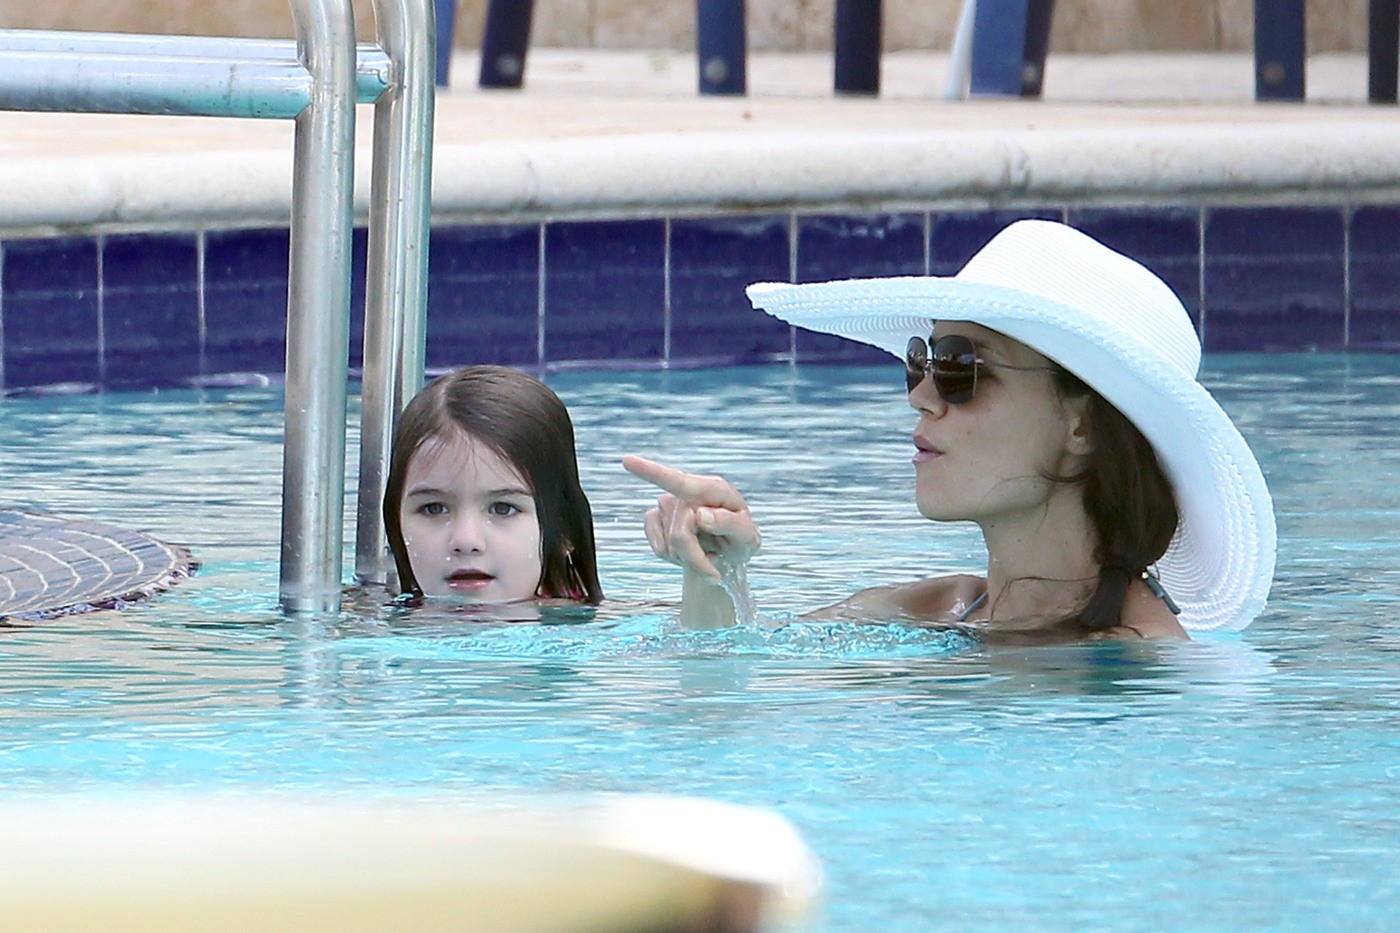 Katie Holmes And Daughter Suri Cruise Have A Relaxing Afternoon Together As They Splash Around